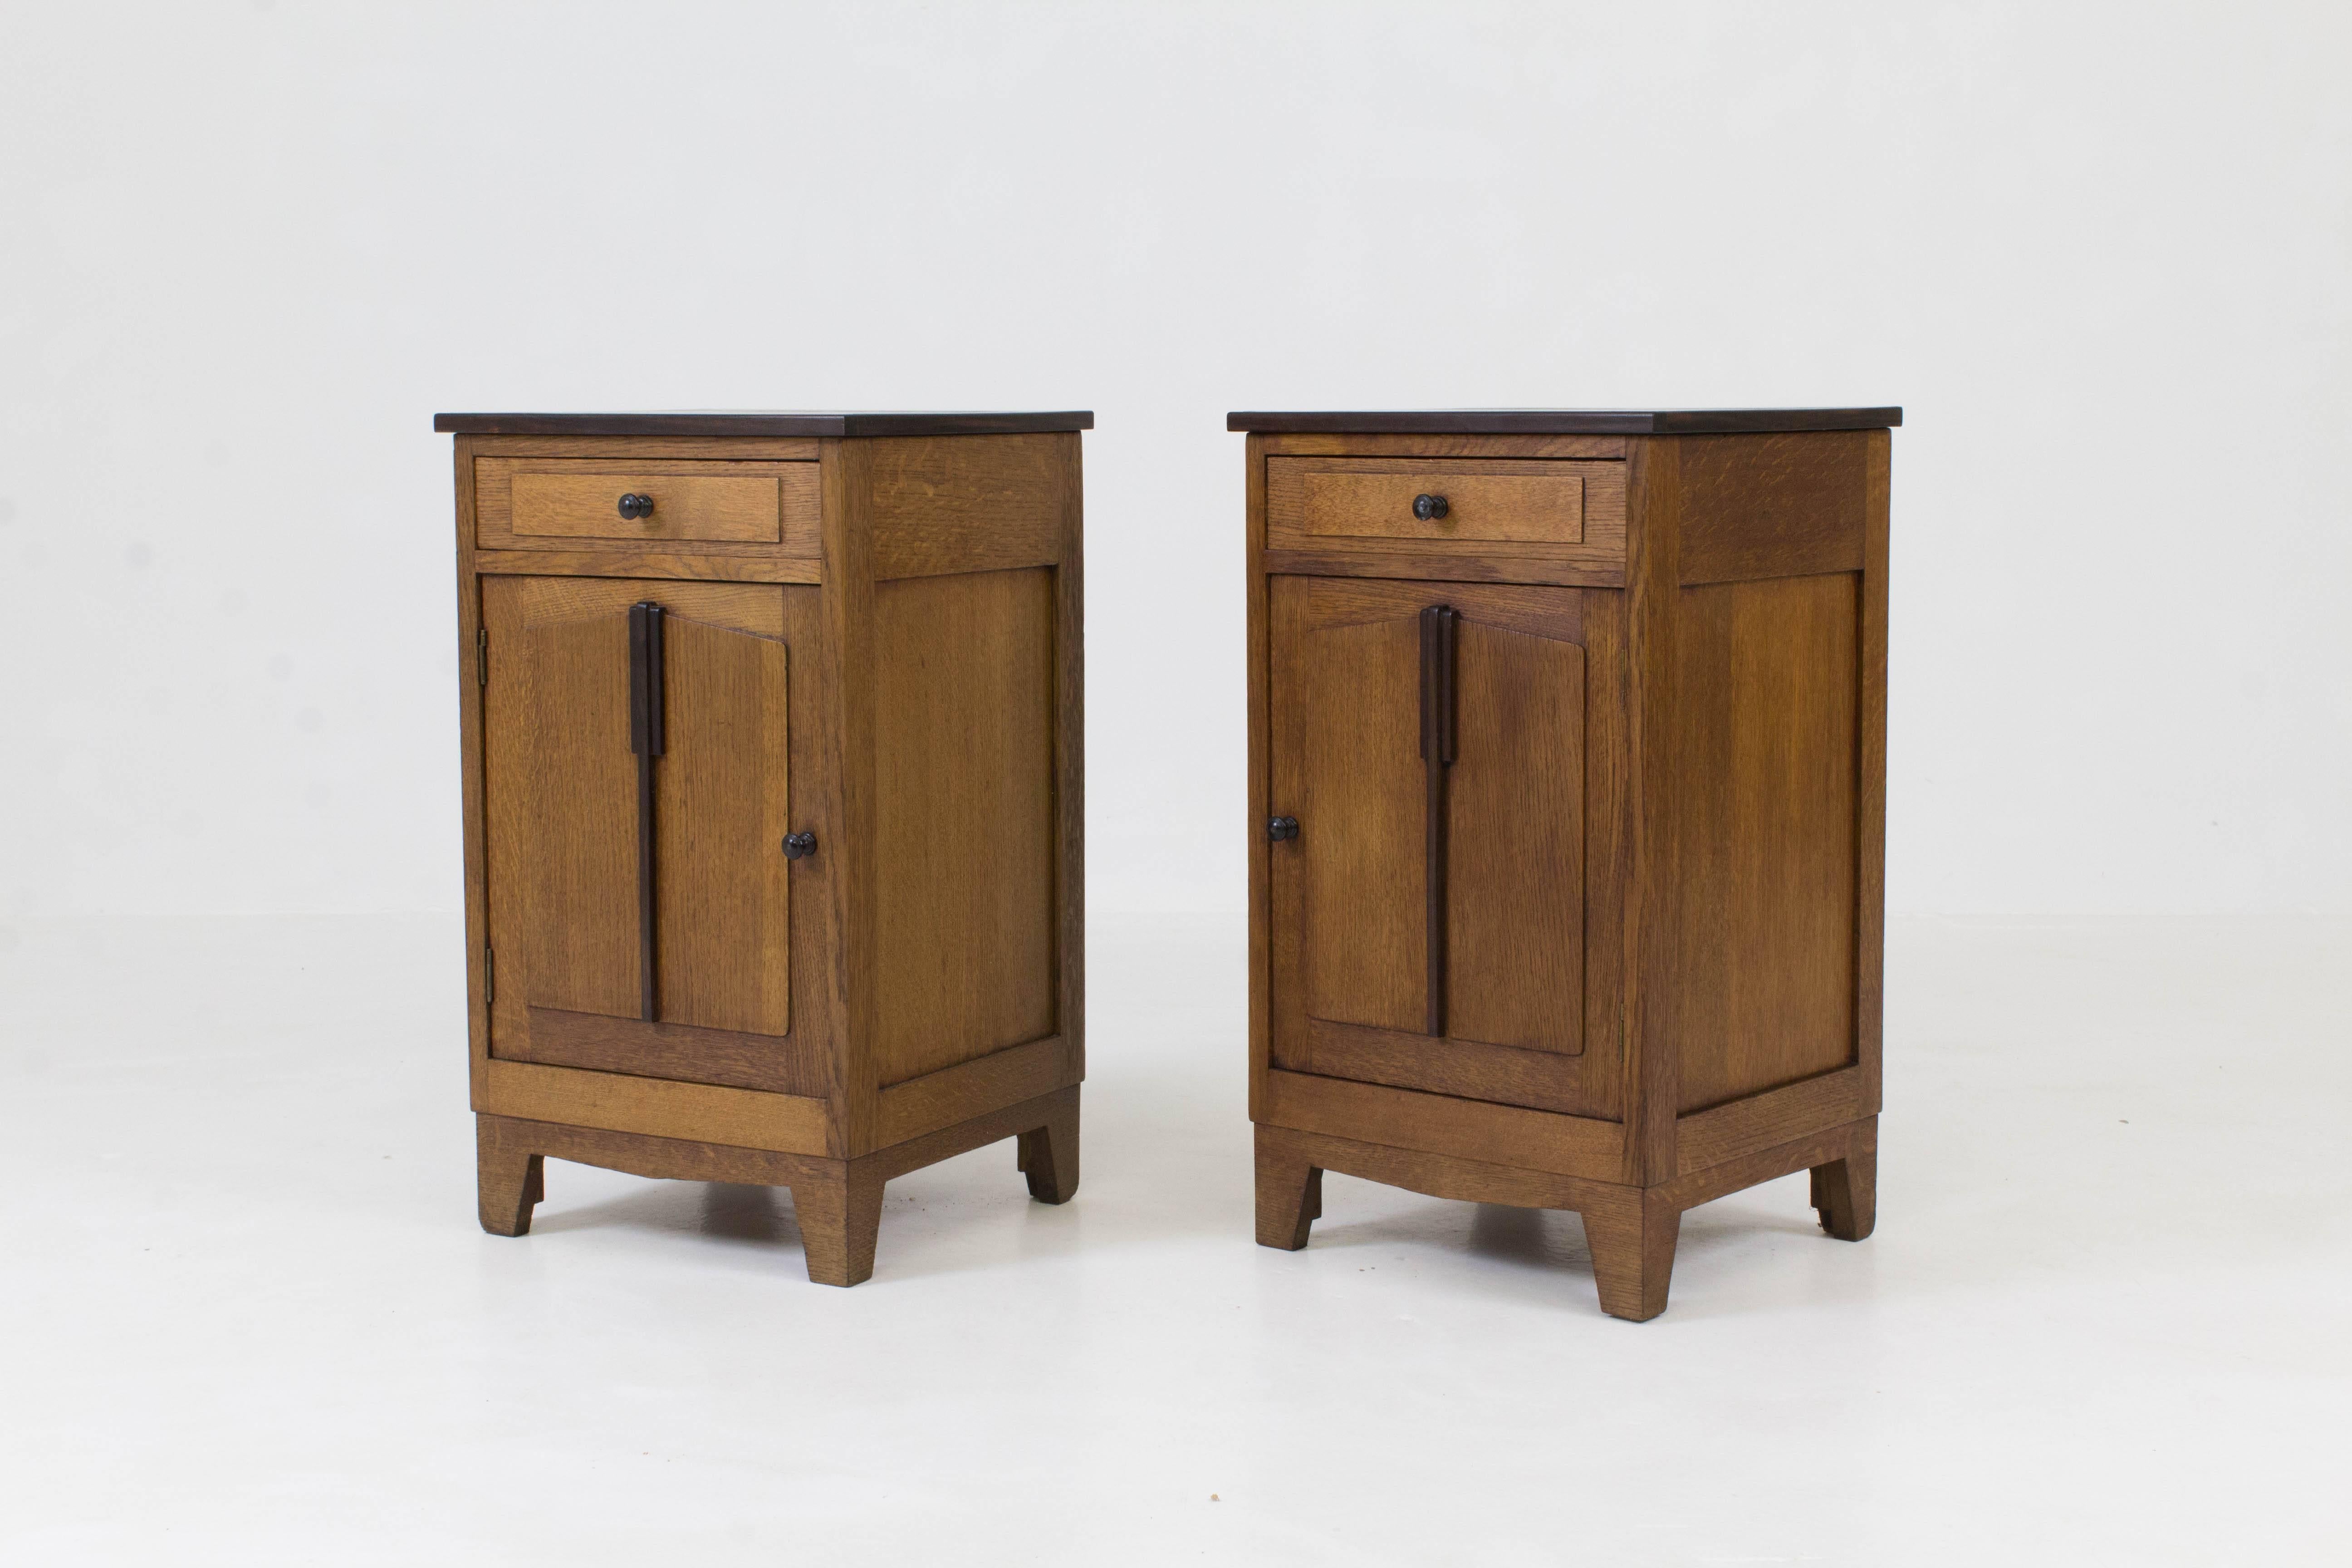 Striking pair of Dutch Art Deco Amsterdam School nightstands, 1920s.
Solid oak with Macassar ebony veneered tops.
Solid Macassar ebony knobs and lining on the drawers and doors.
In very good condition with minor wear consistent with age and